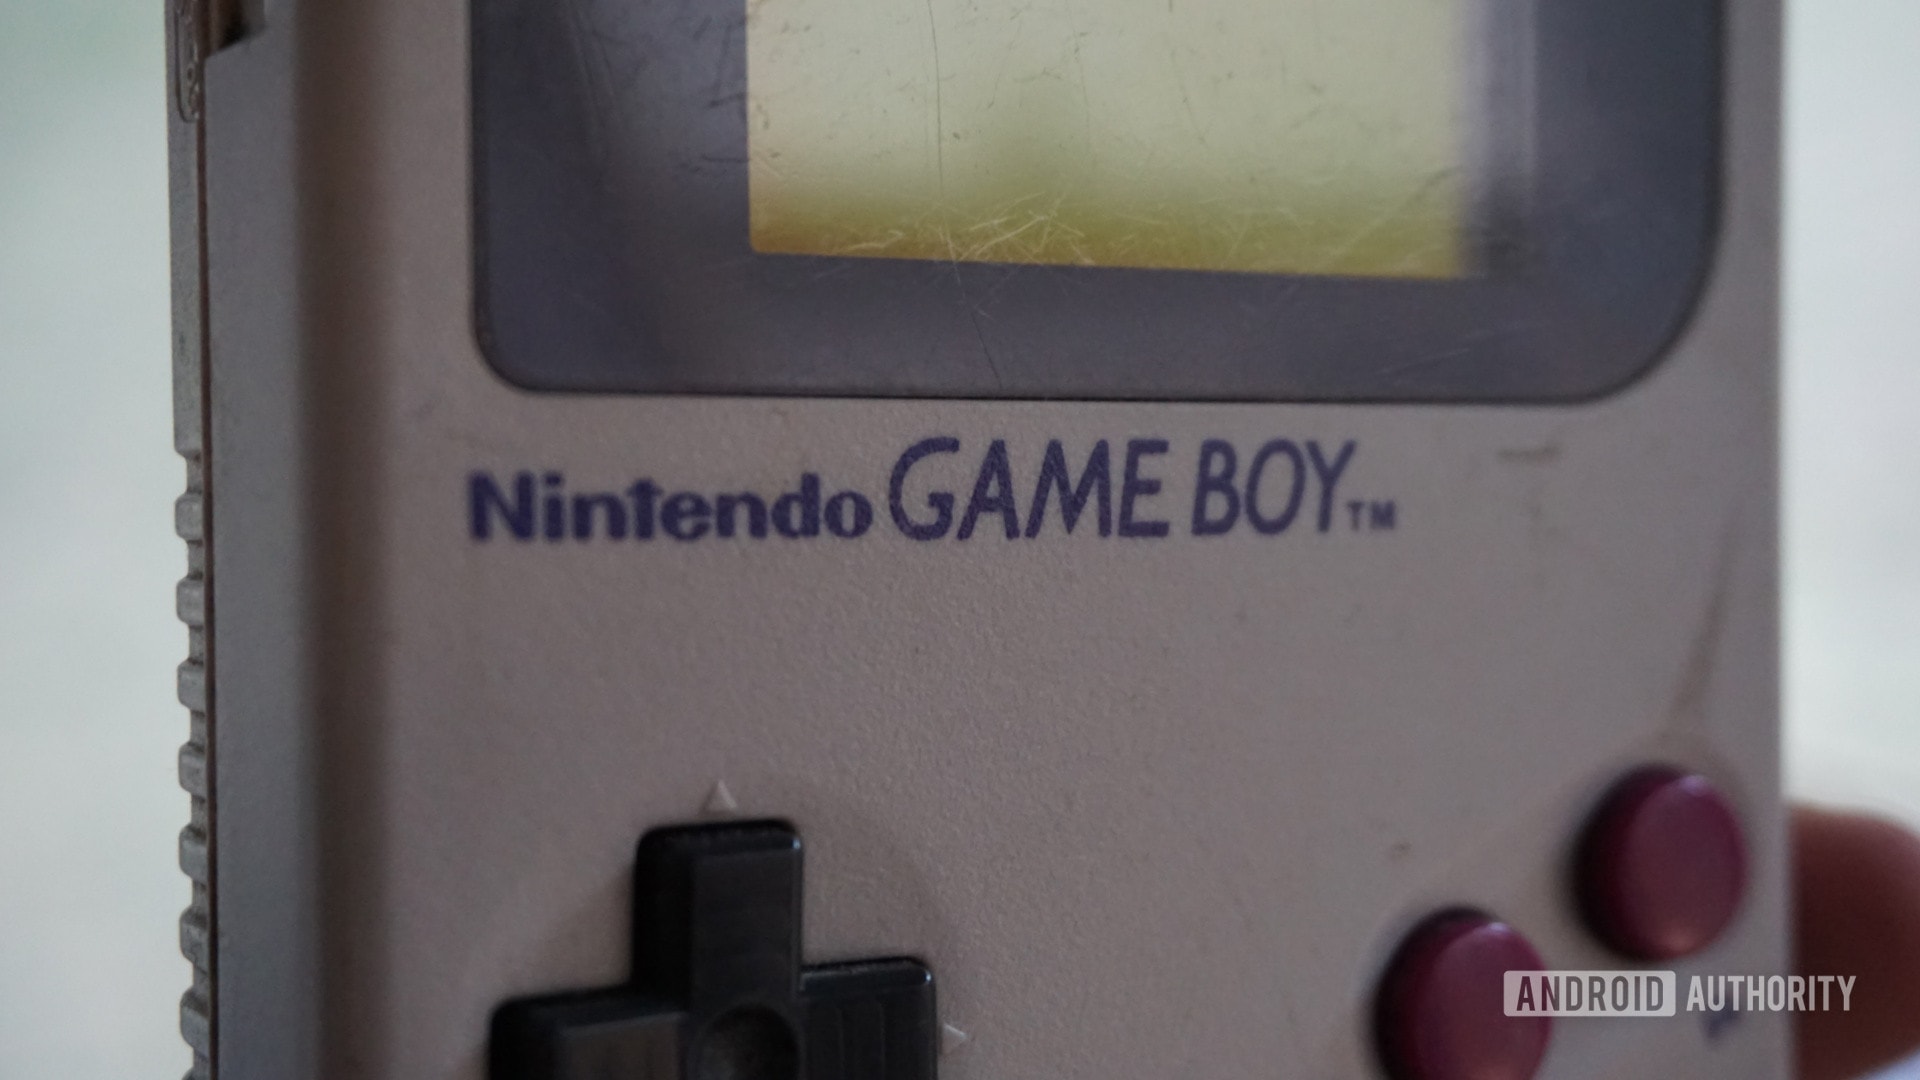 Picture of the Nintendo Game Boy.